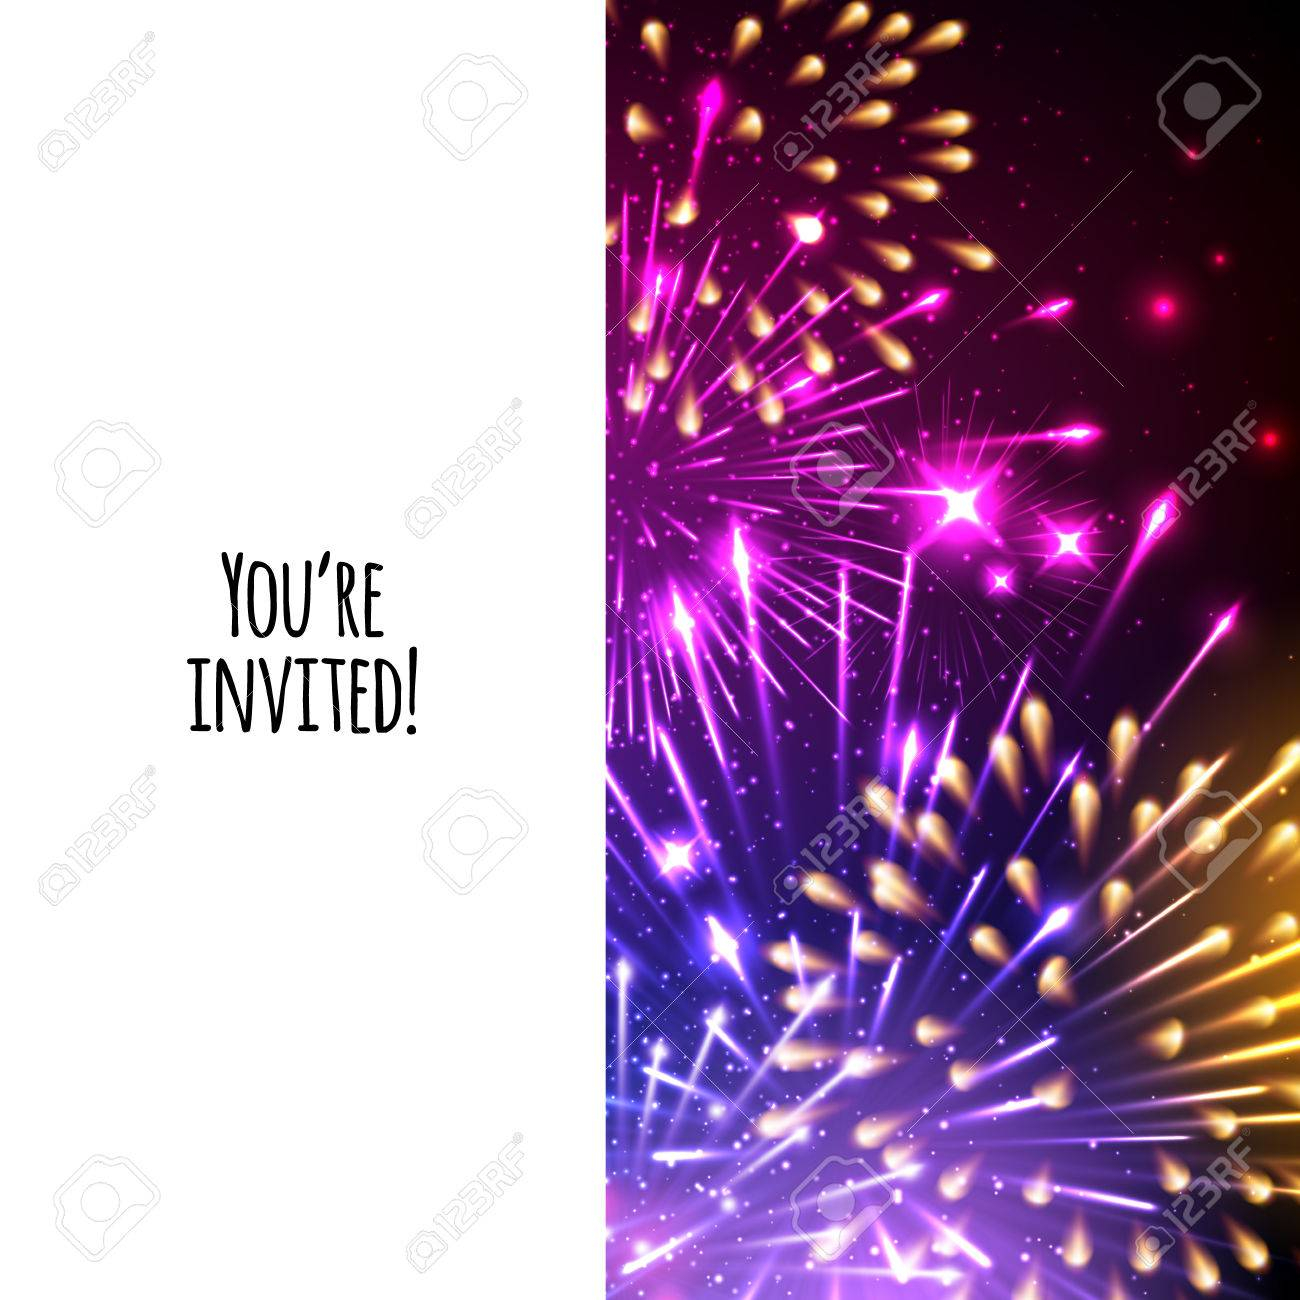 Universal Invitation Card Template Design With Fireworks Background in size 1300 X 1300